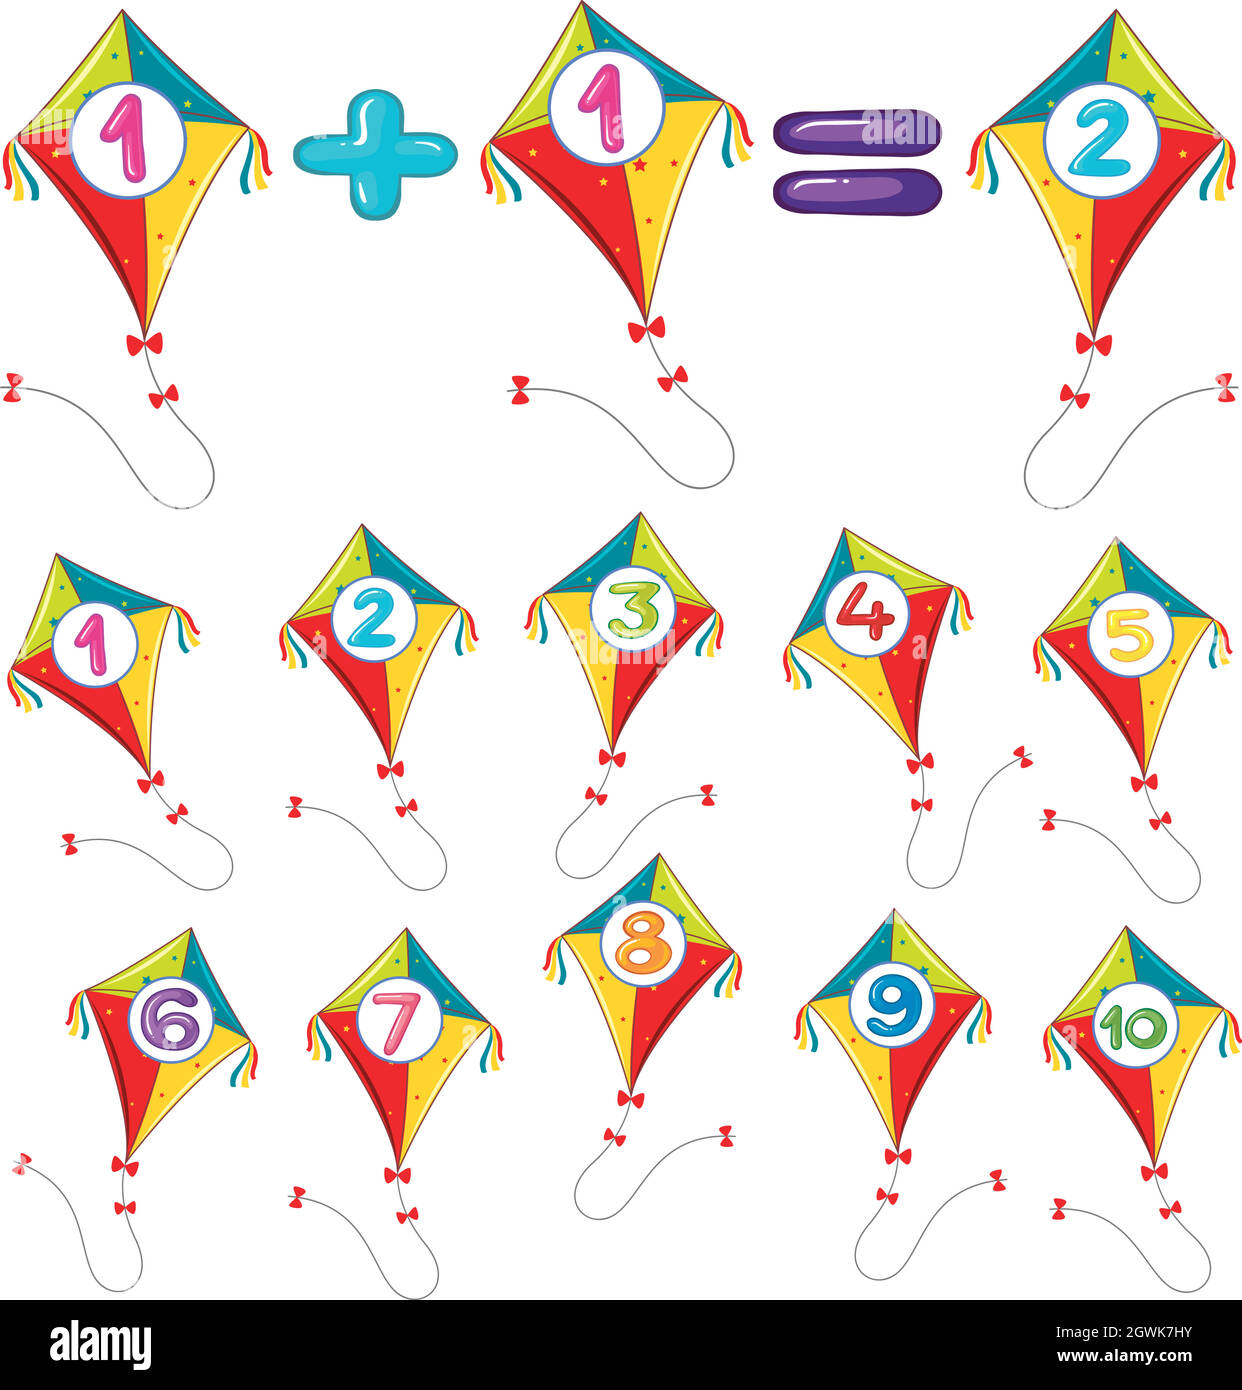 Colorful kites and numbers Stock Vector